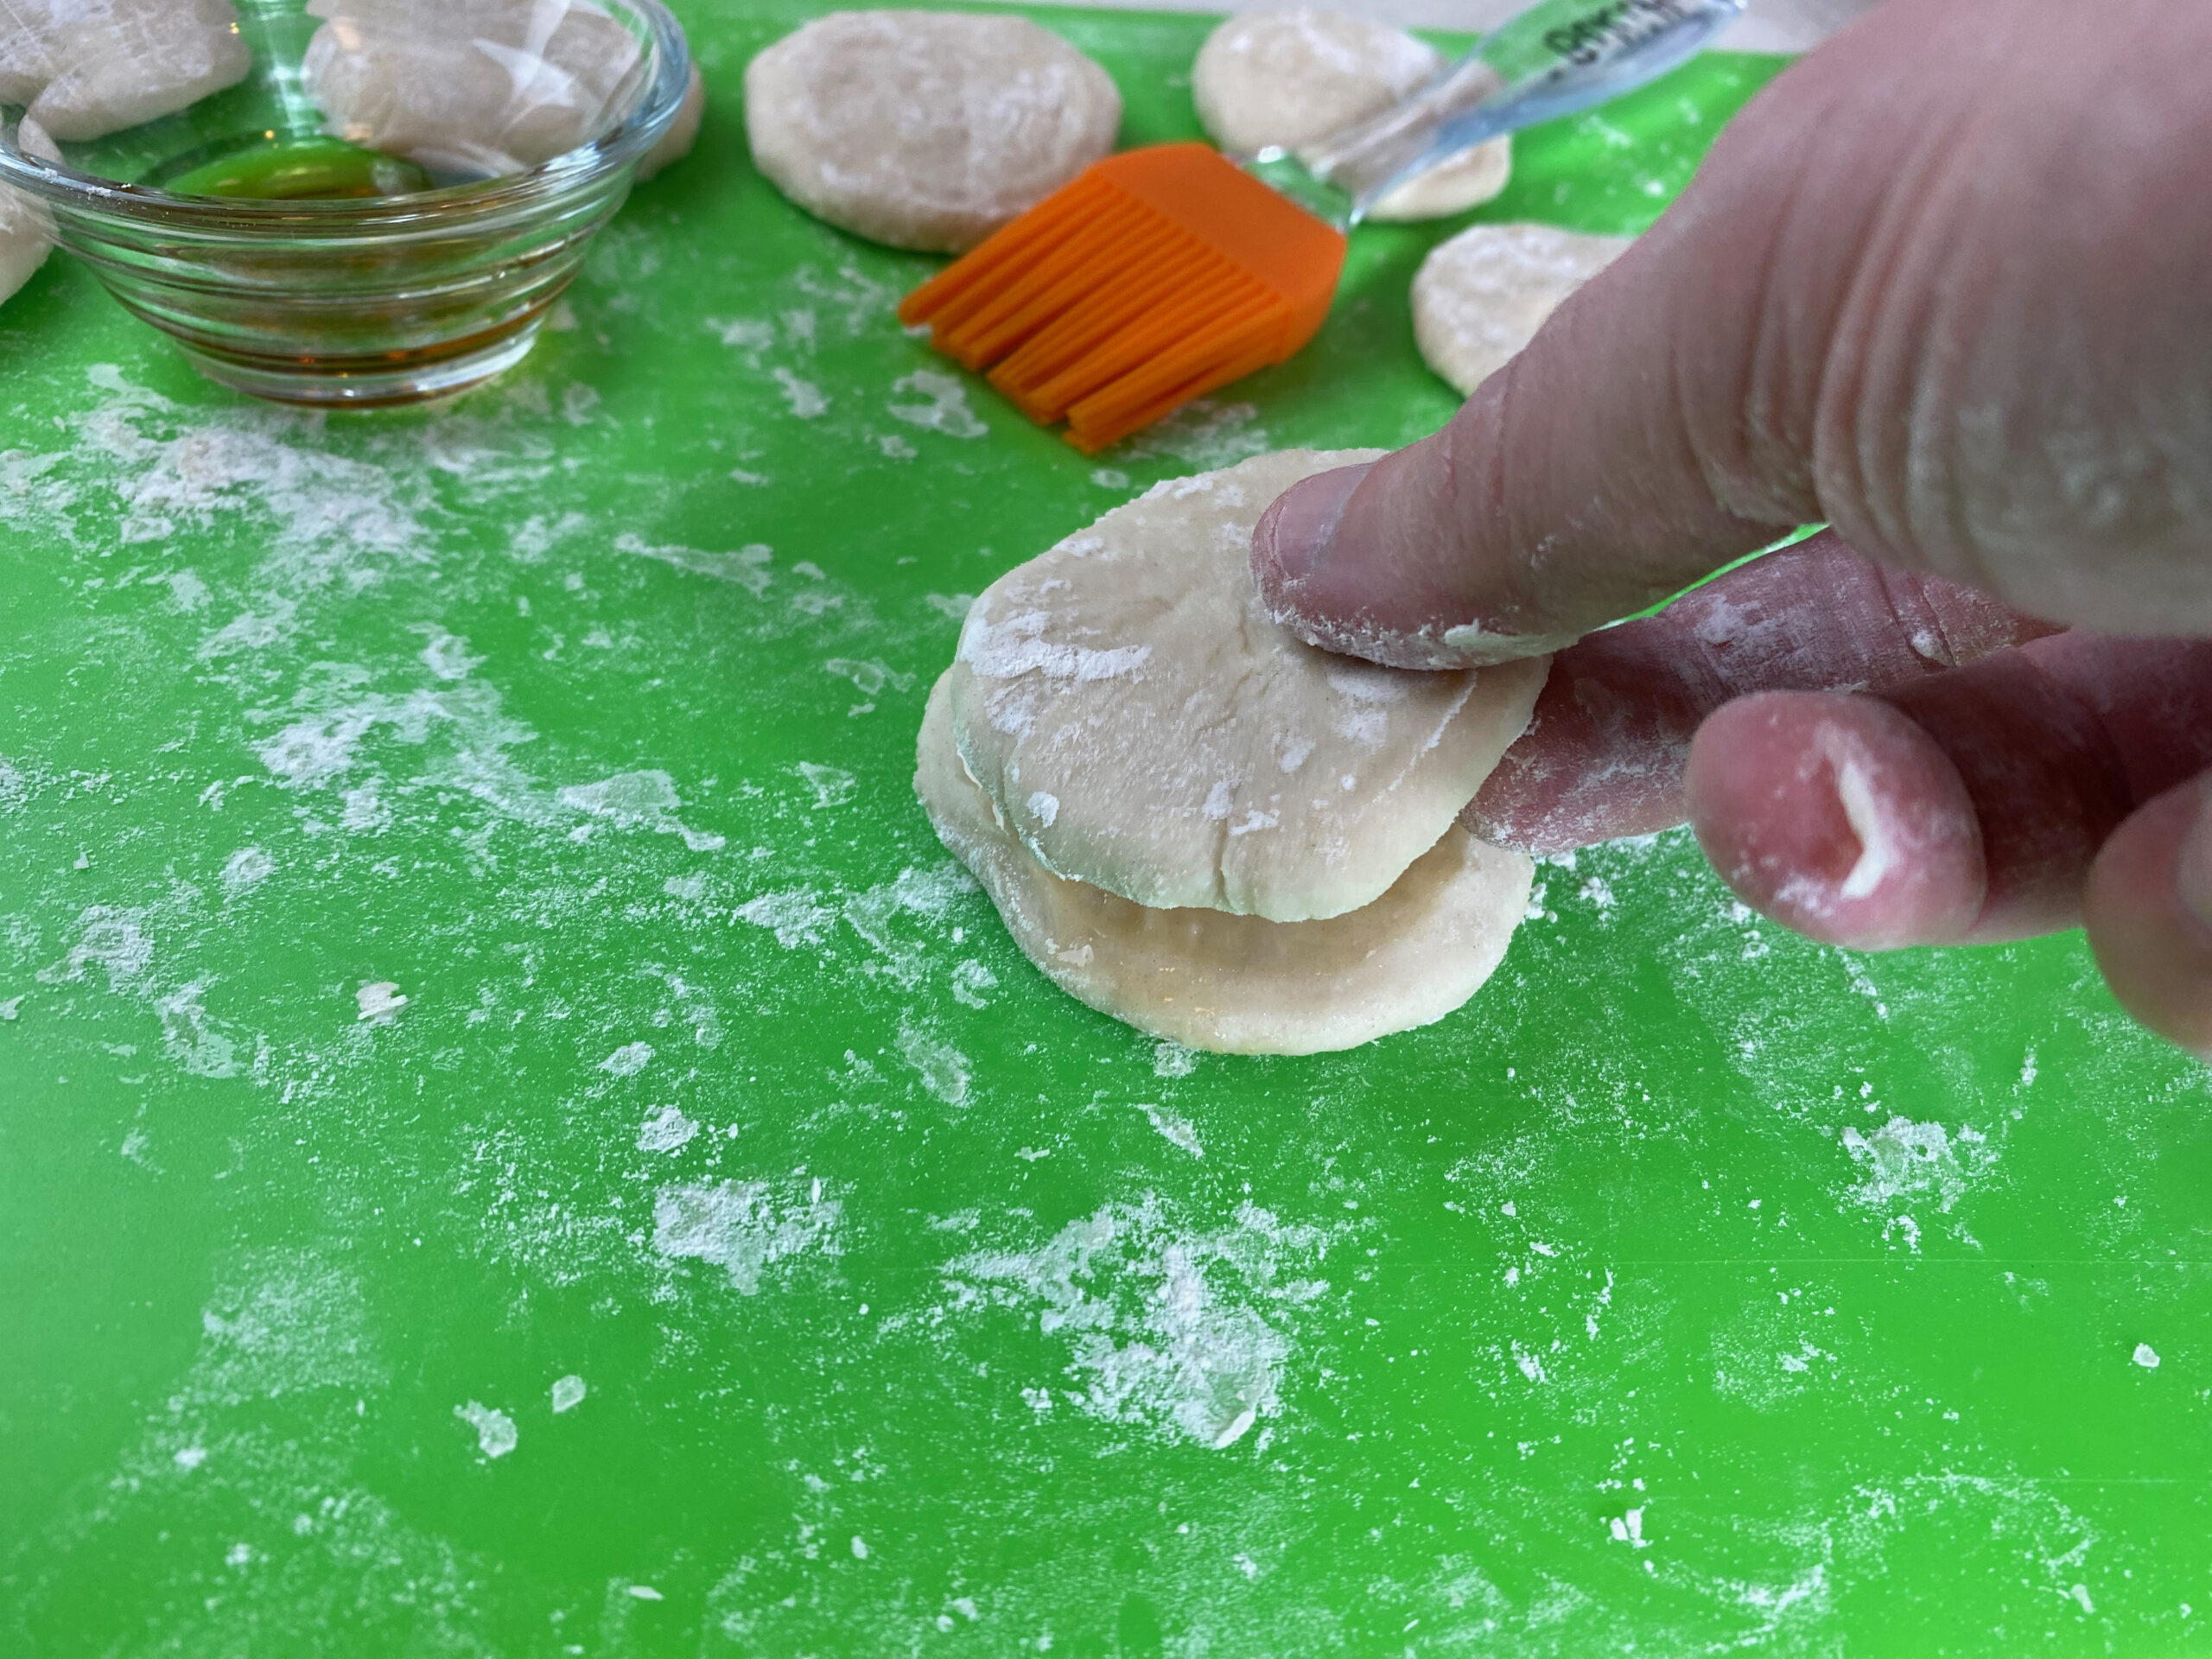 a disk of dough is set on top of another